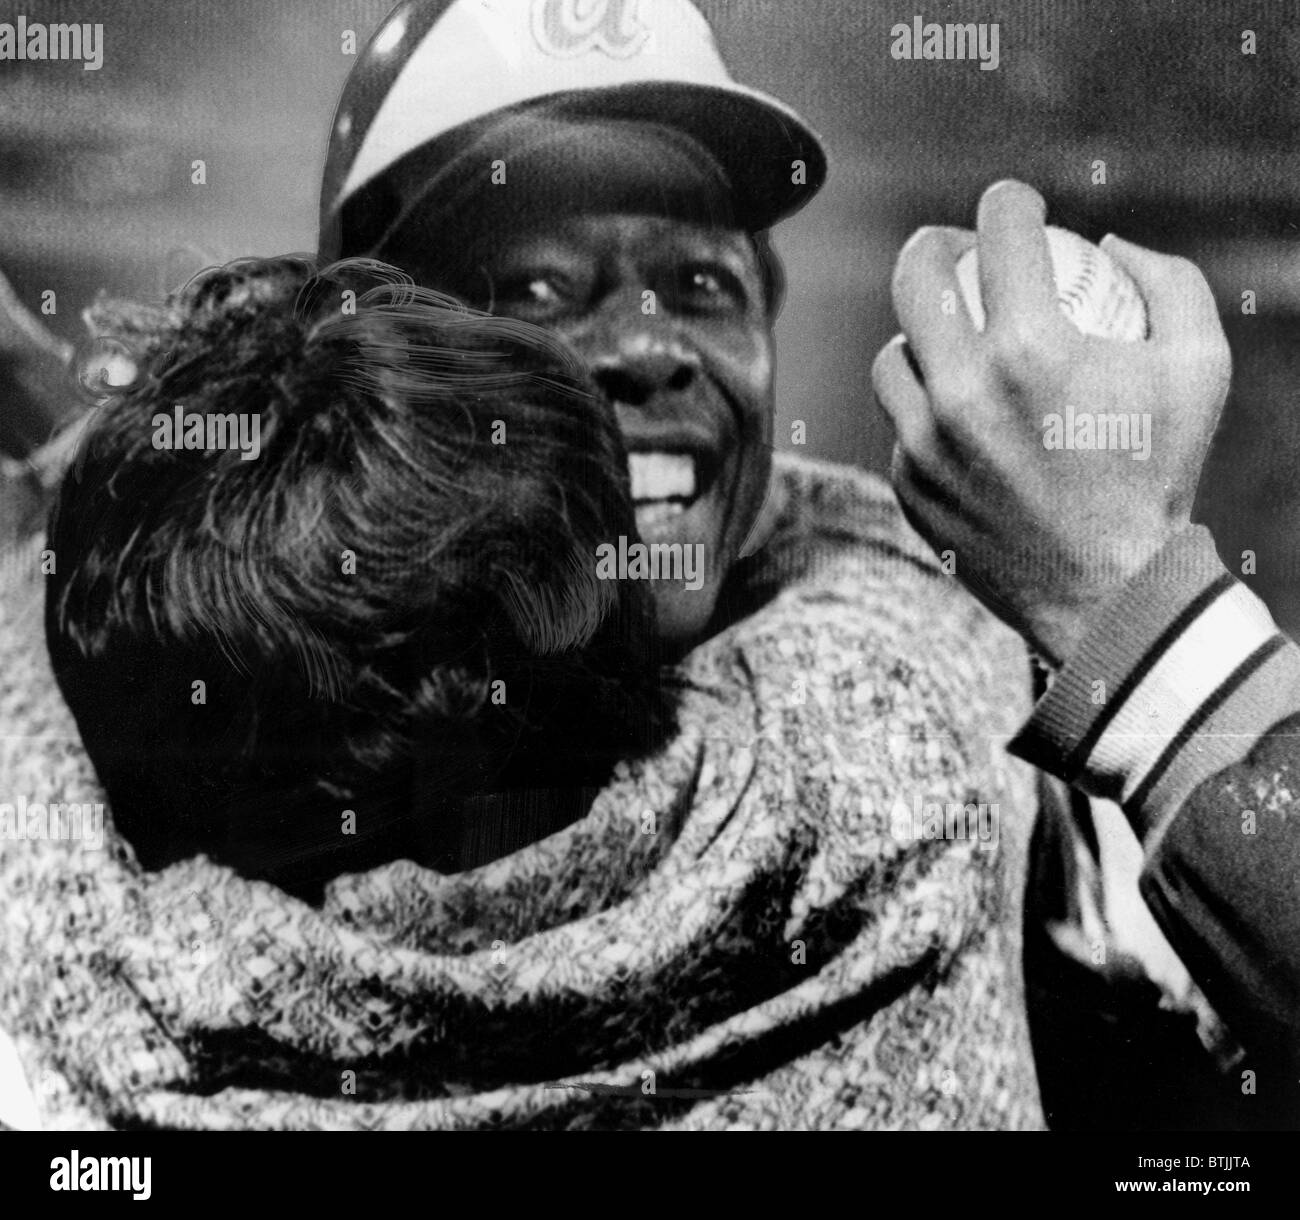 Hank Aaron is hugged by his mother after record breaking 715th home run off of L.A. Dodgers Pitcher Al Downing. Atlanta, GA, 04- Stock Photo